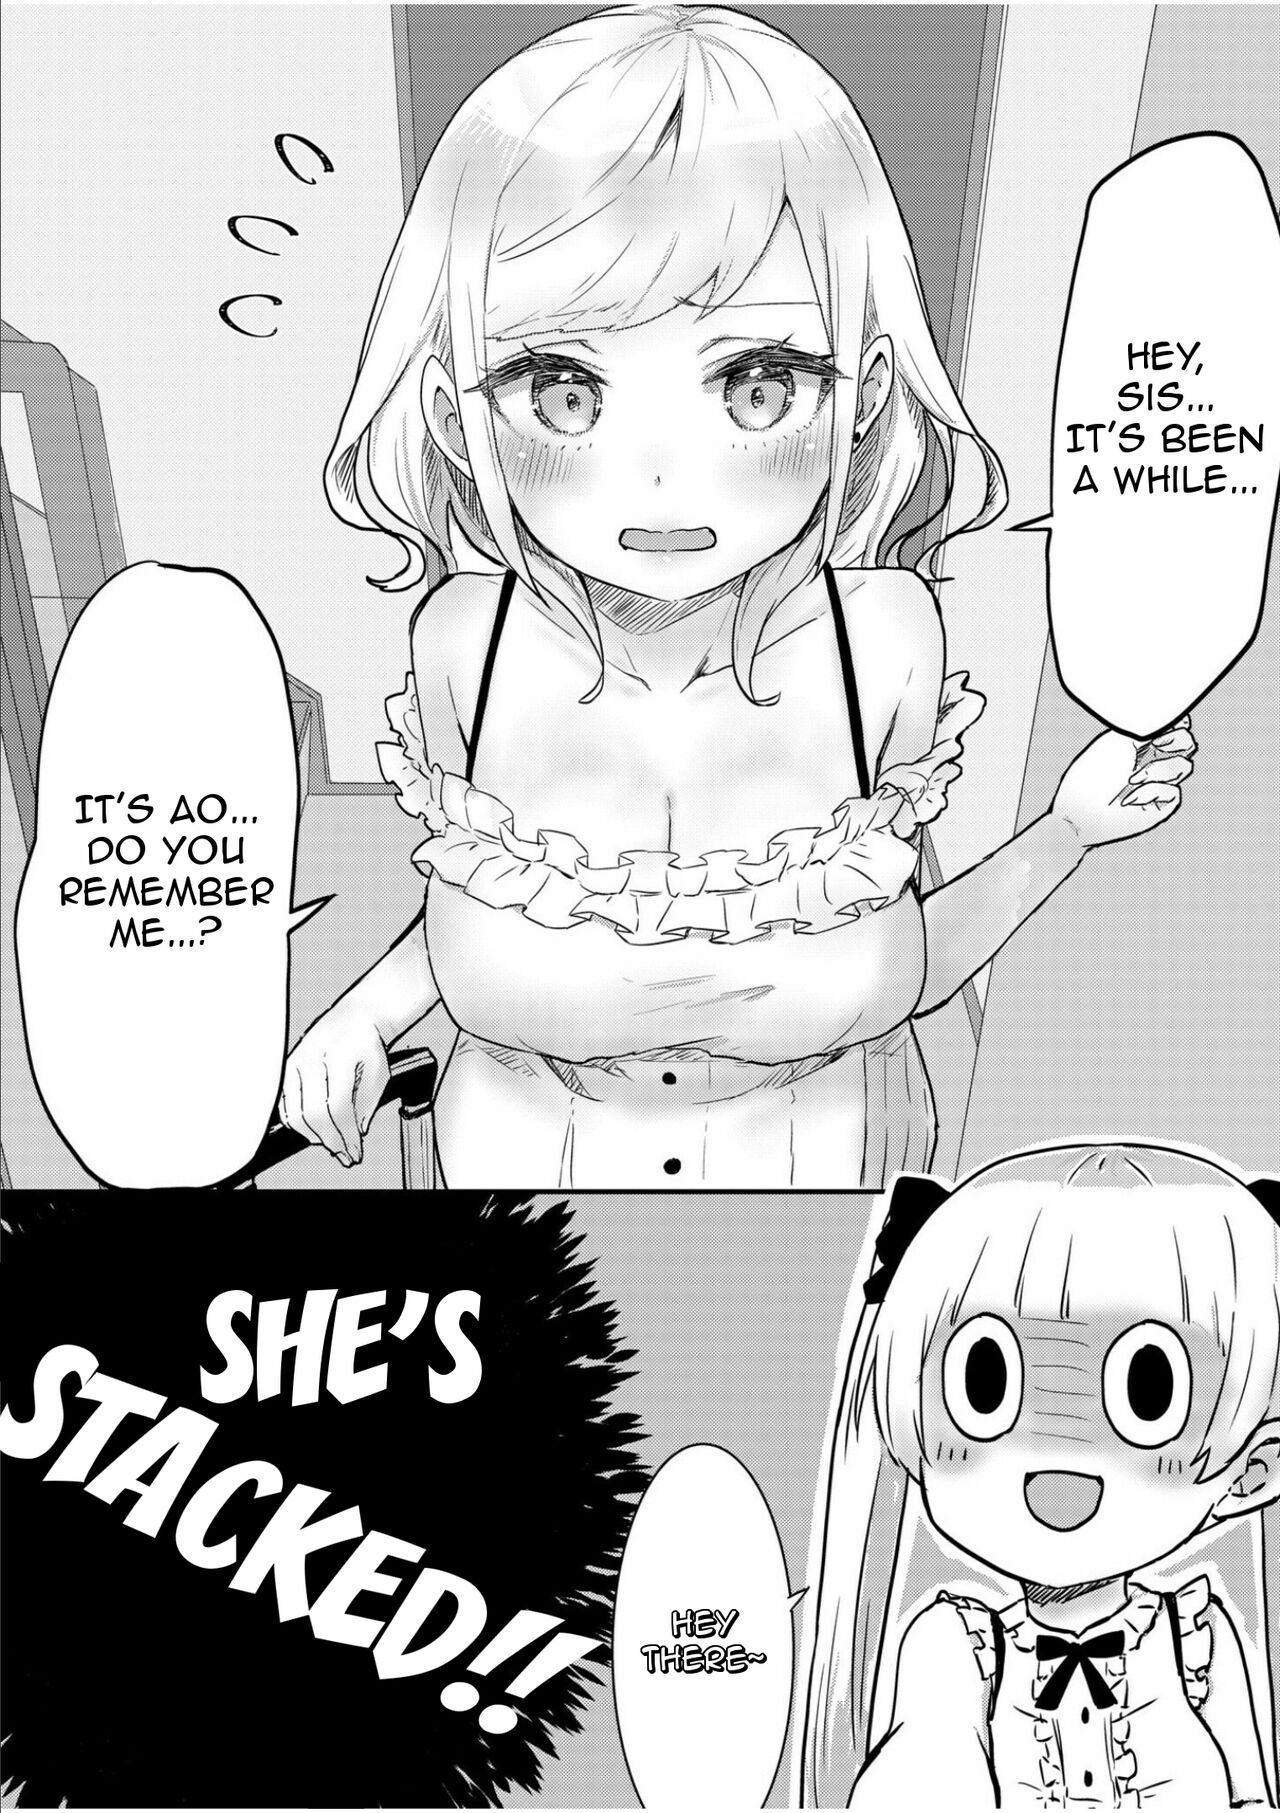 Large Twin Sisters' Yuri Life Ch. 1-4 Bigtits - Page 9